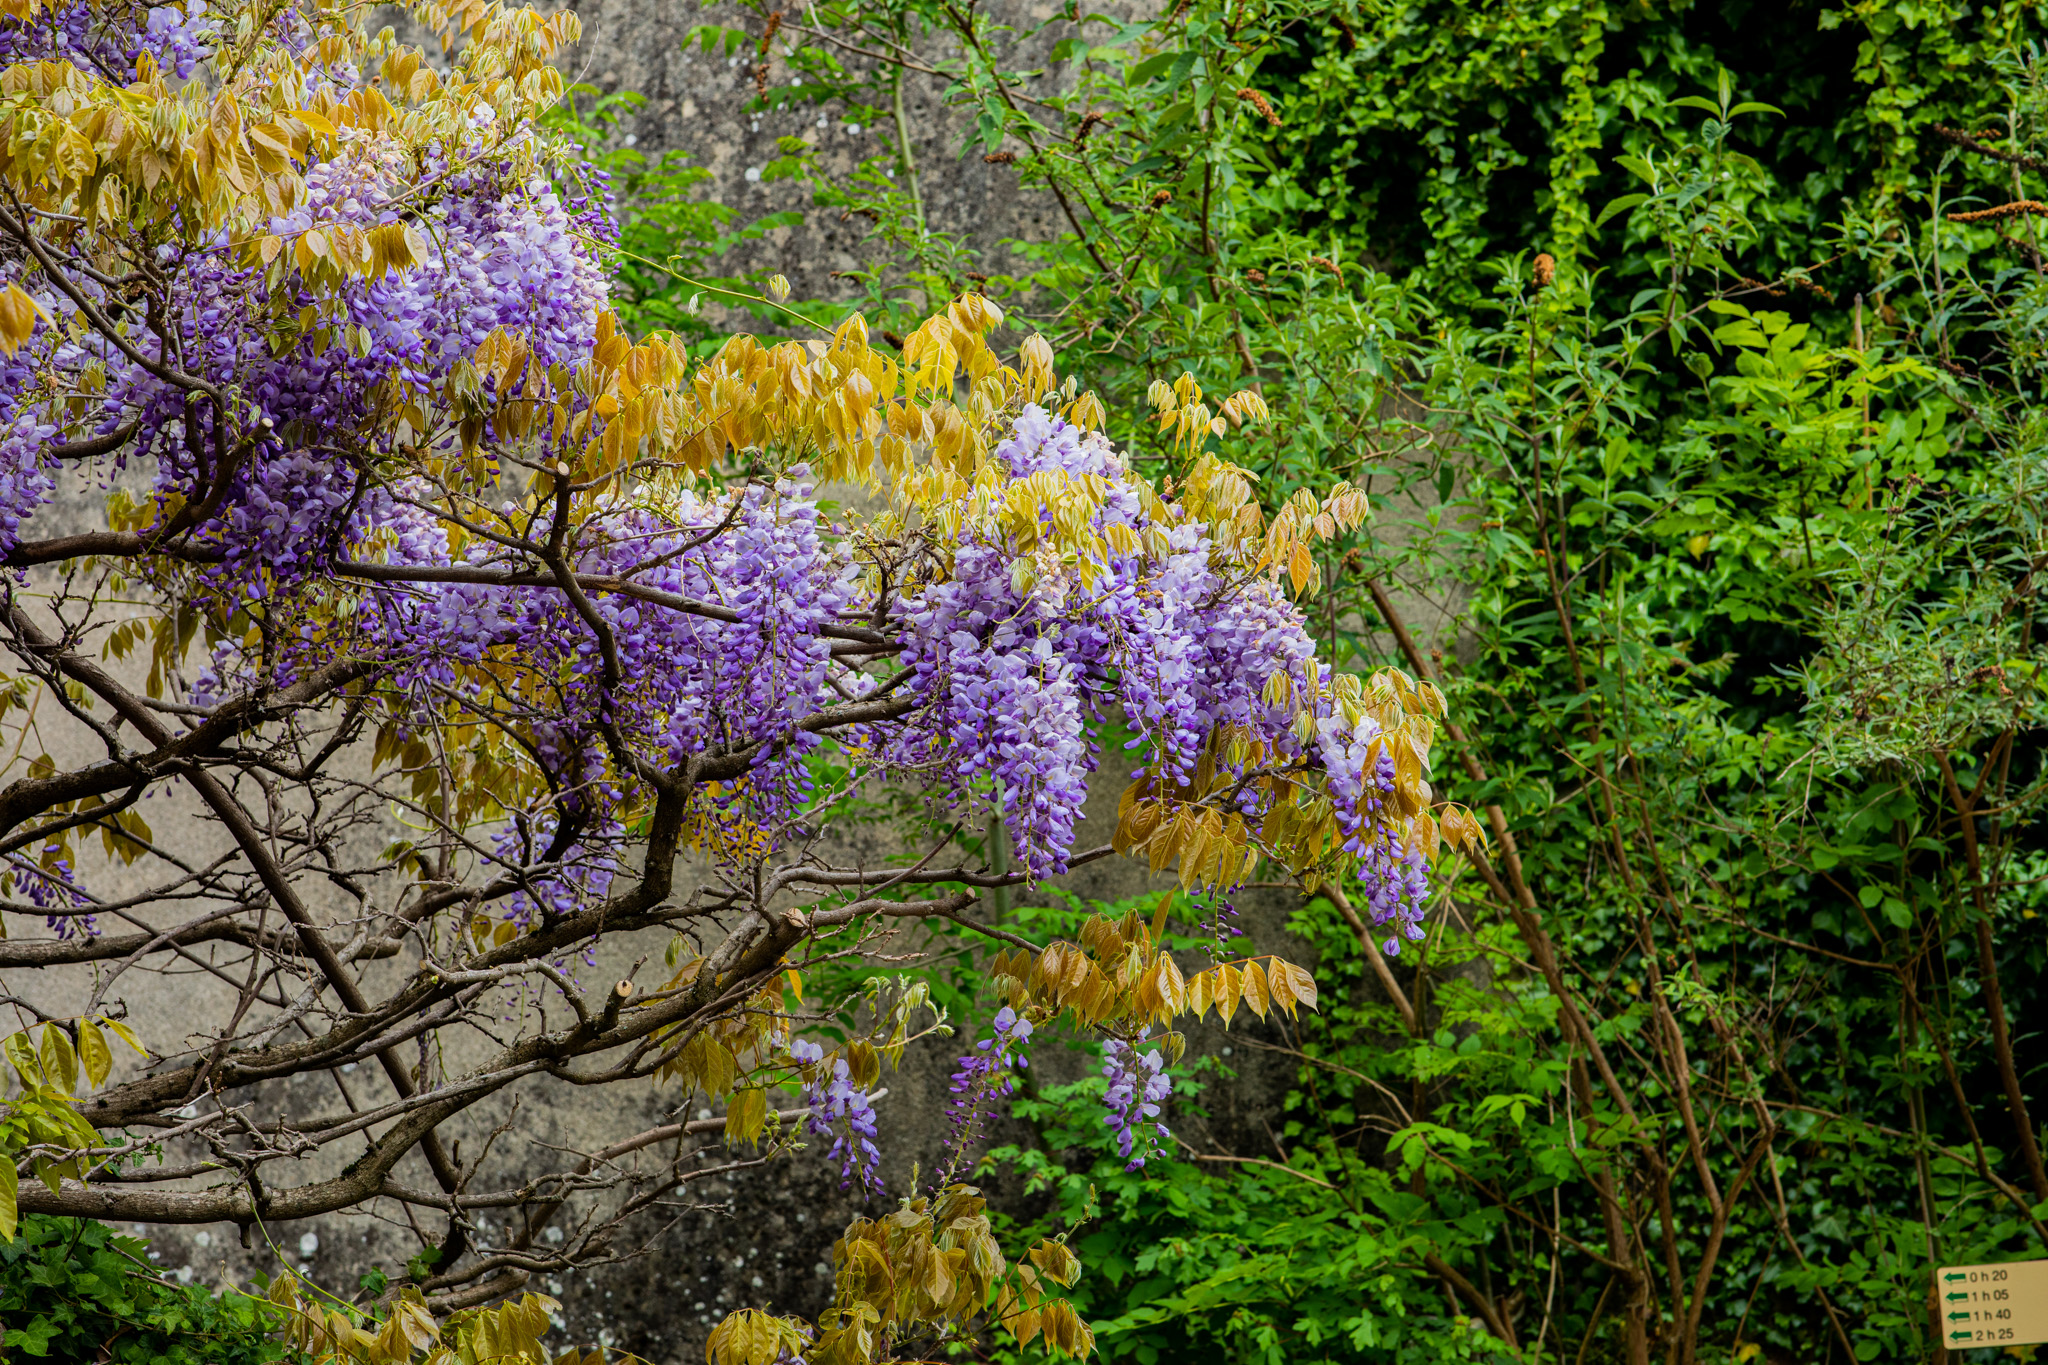 Photography Outdoors Nature Greenery Flowers Leaves Trees Vines Shrubs Plants Wisteria Branch 2048x1365